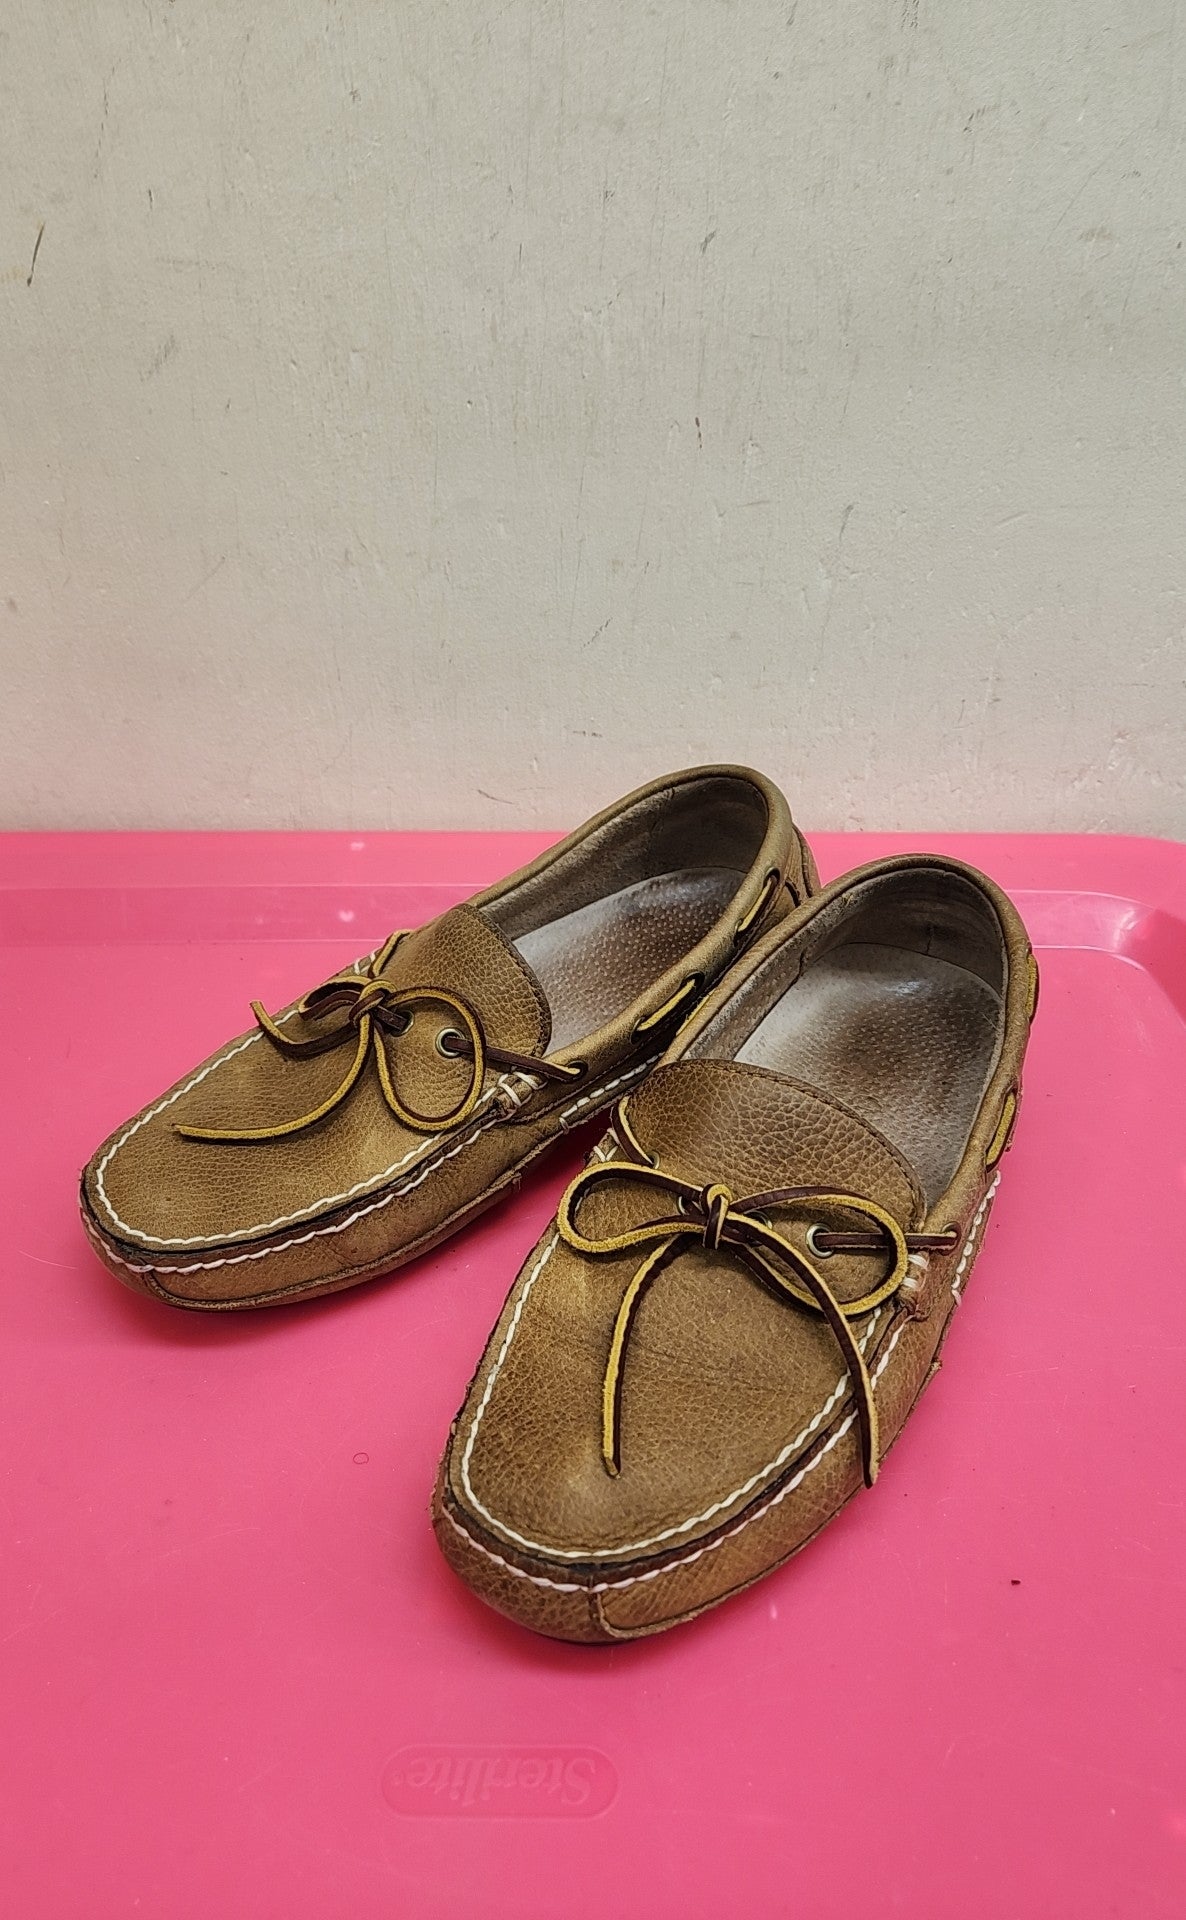 Polo by Ralph Lauren Men's Size 7 Brown Shoes